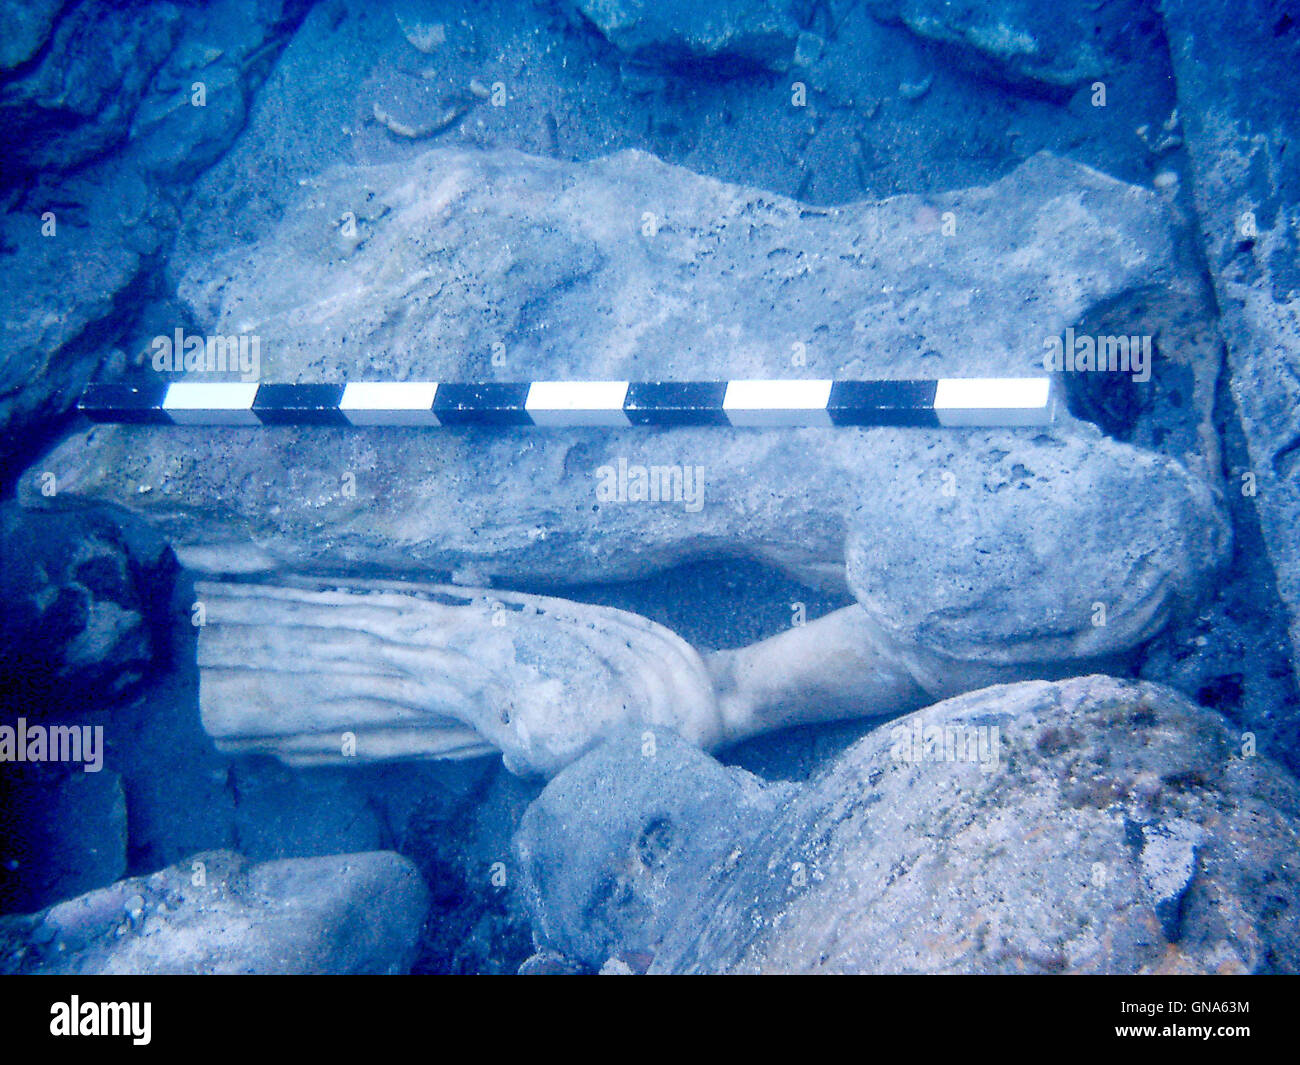 (160829) -- ATHENS, Aug. 29 (Xinhua) -- The undated file photo taken by Greece's Ephorate of Underwater Antiquities (EUA) shows the antiquities discovered at the ancient port of Kythnos island in Greece. Lacking funds partly because of the debt crisis, Greece which is rich in underwater antiquities, is now working closely with archaeological groups from other countries to explore, preserve and display the treasure trove. (Xinhua) To match Feature: Greece strives to preserve underwater antiquities Stock Photo